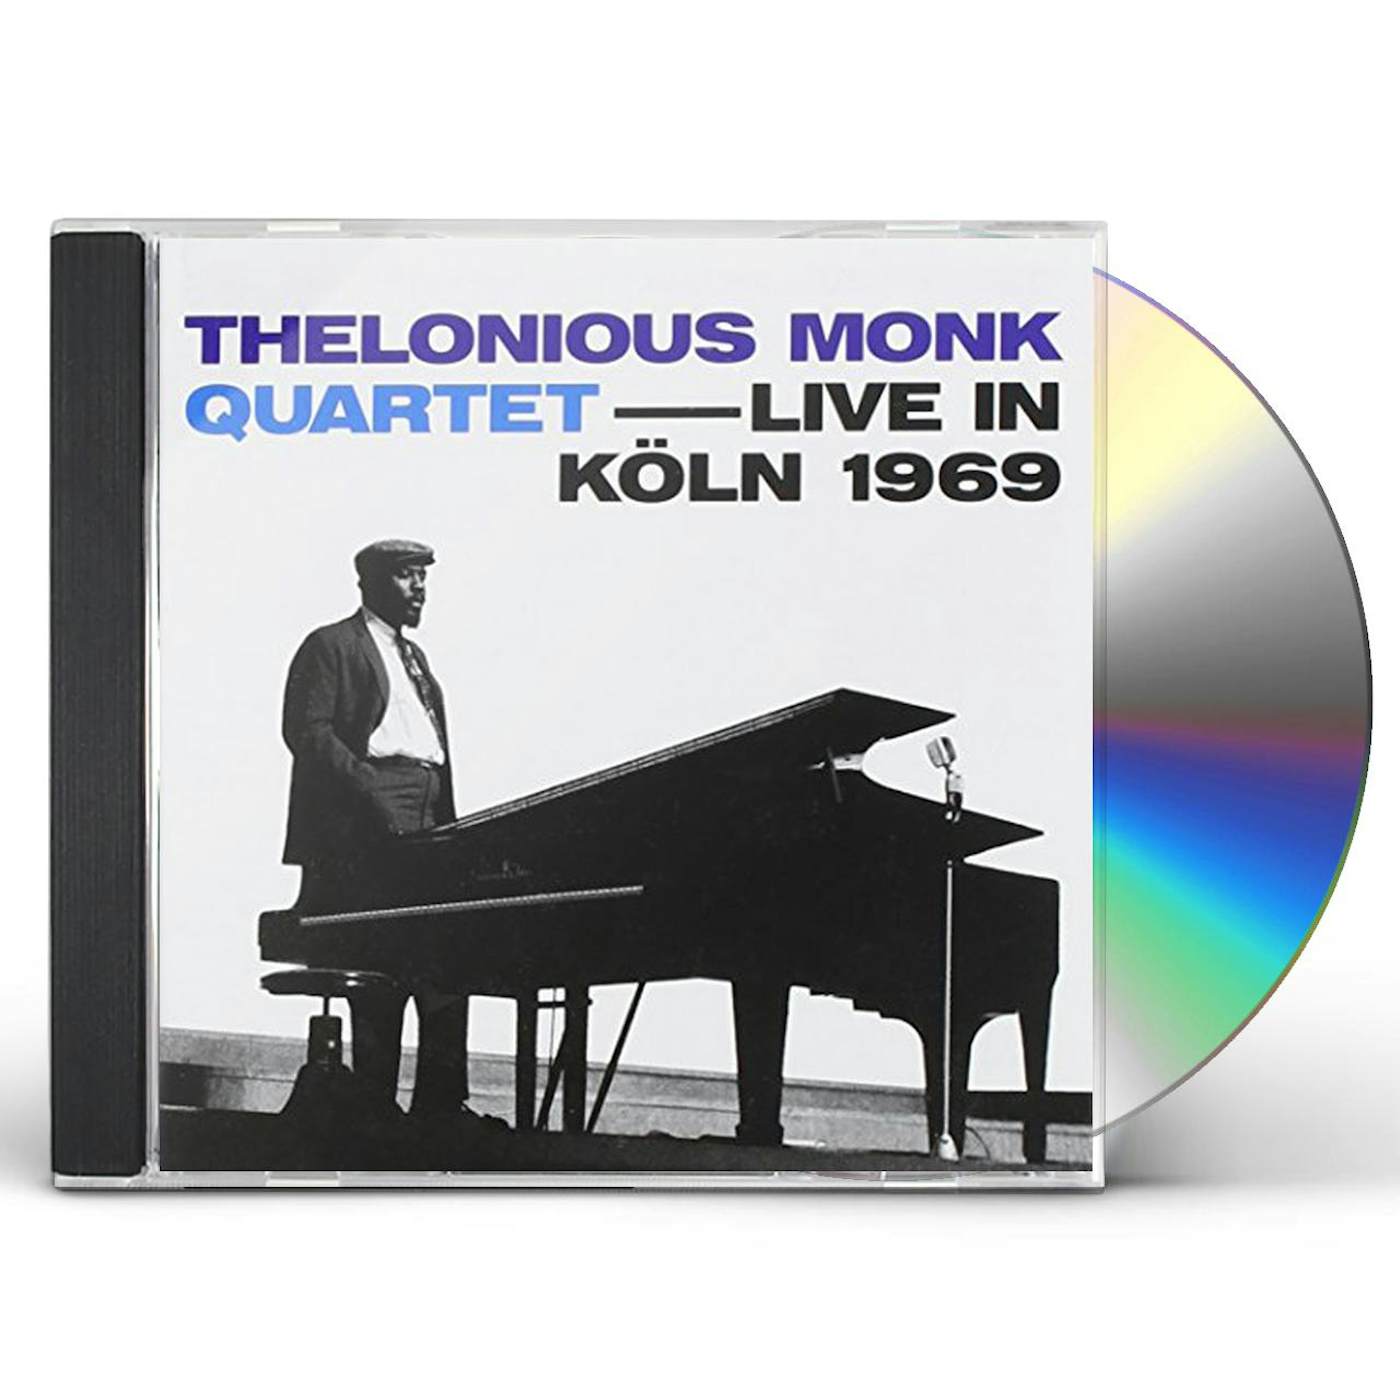 Thelonious Monk LIVE IN KOLN 1969 CD